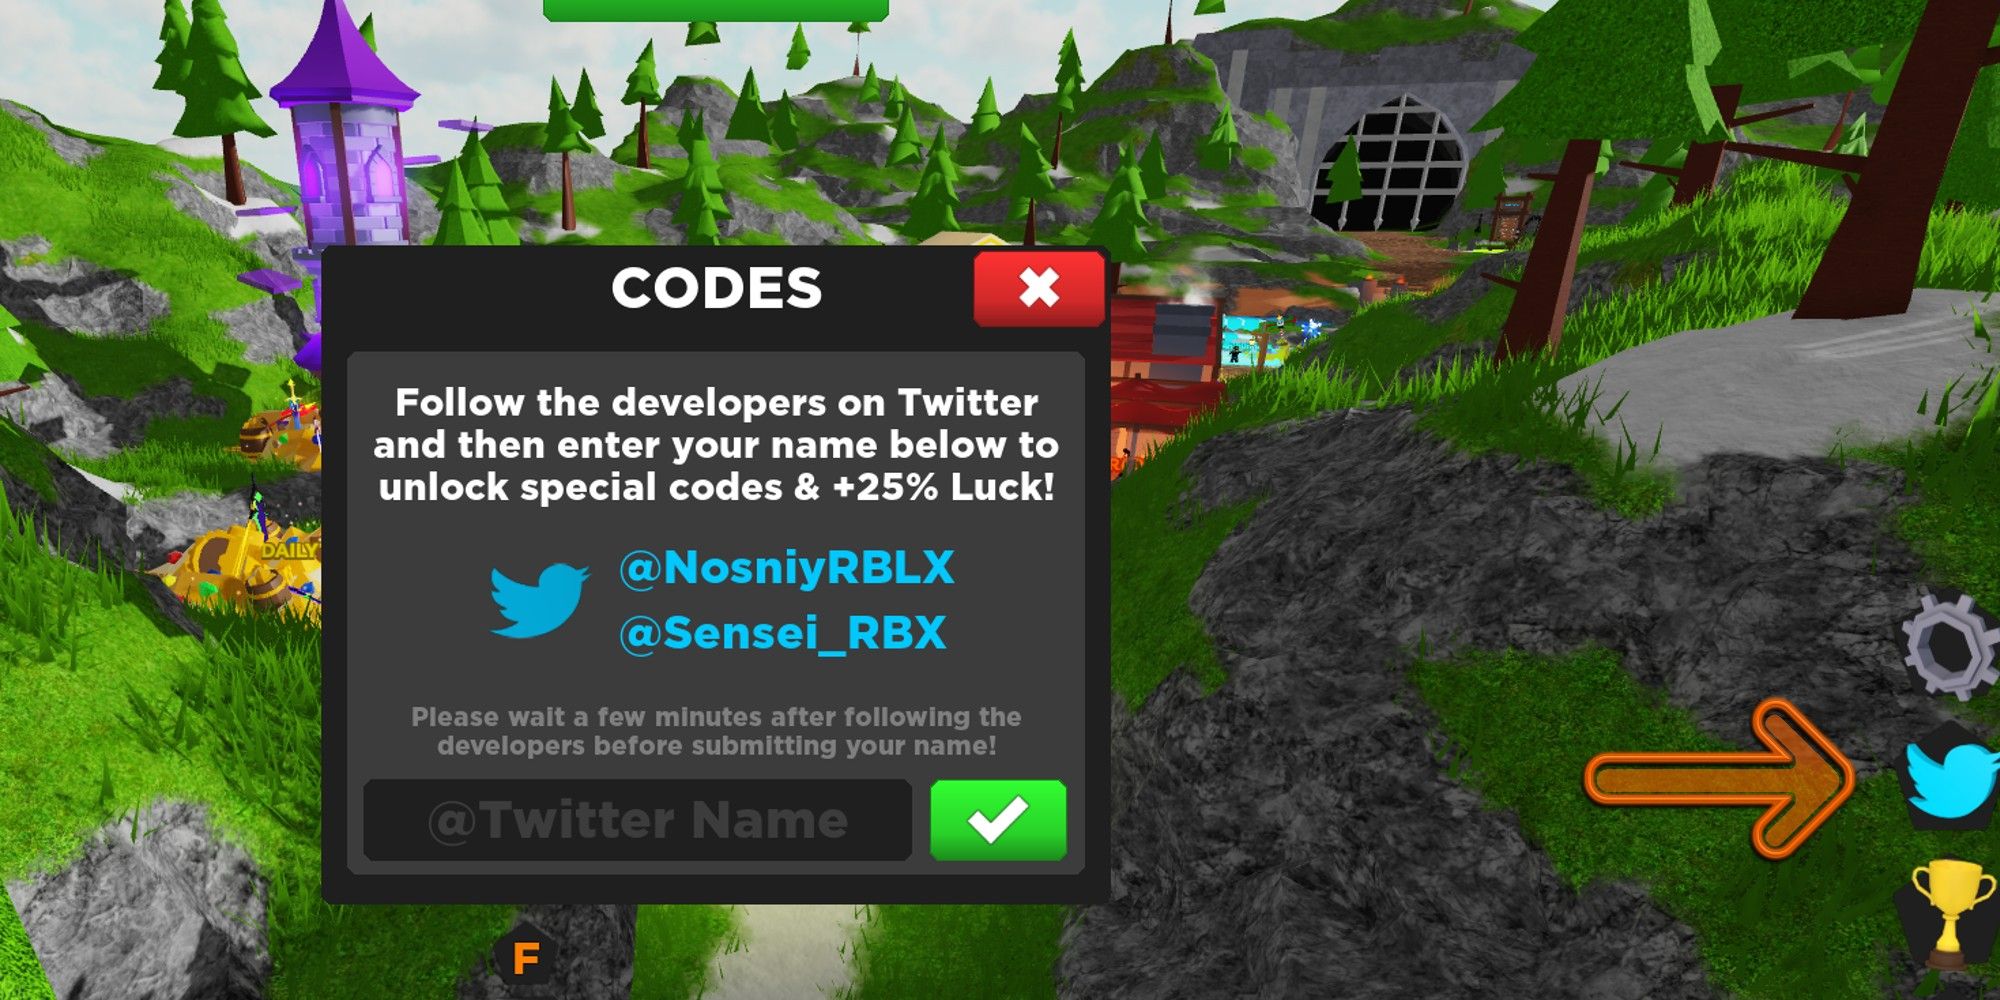 How to use Code Treasure Quest